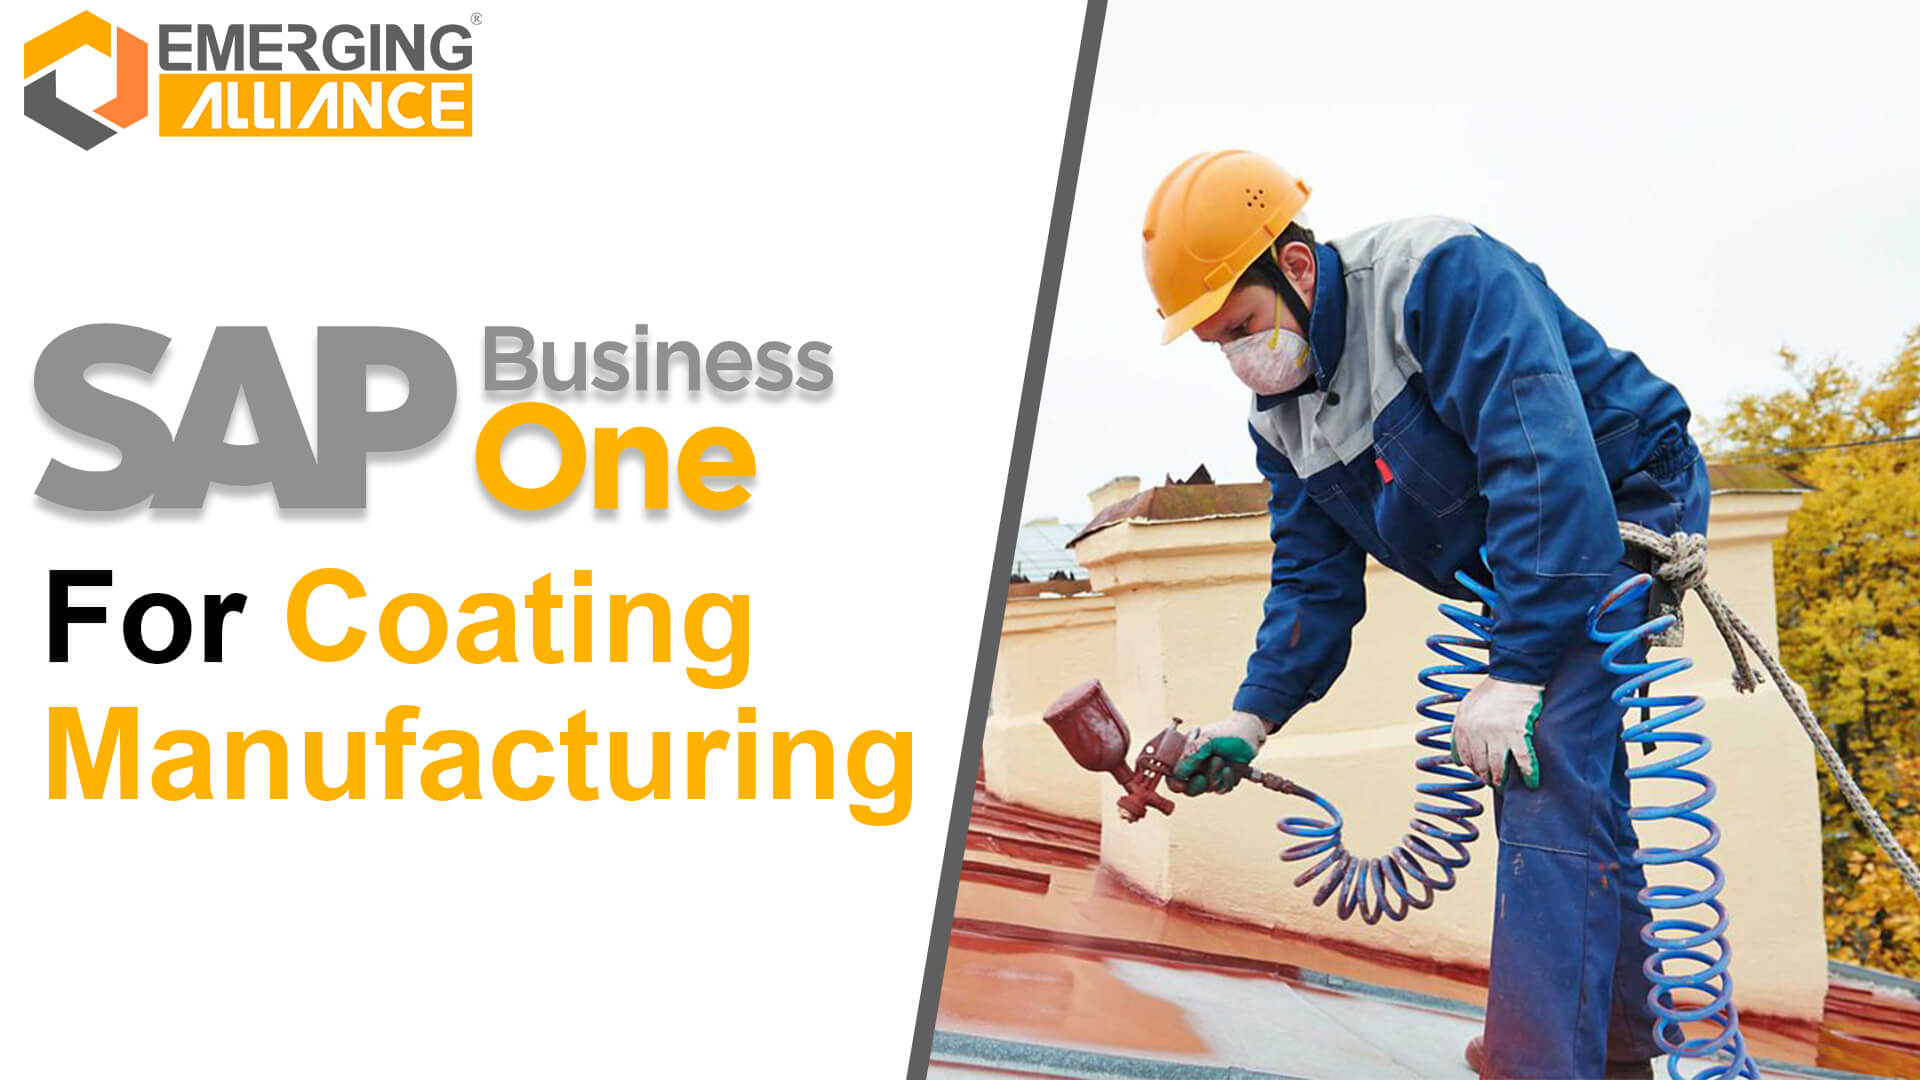 sap business one for coating manufacturing